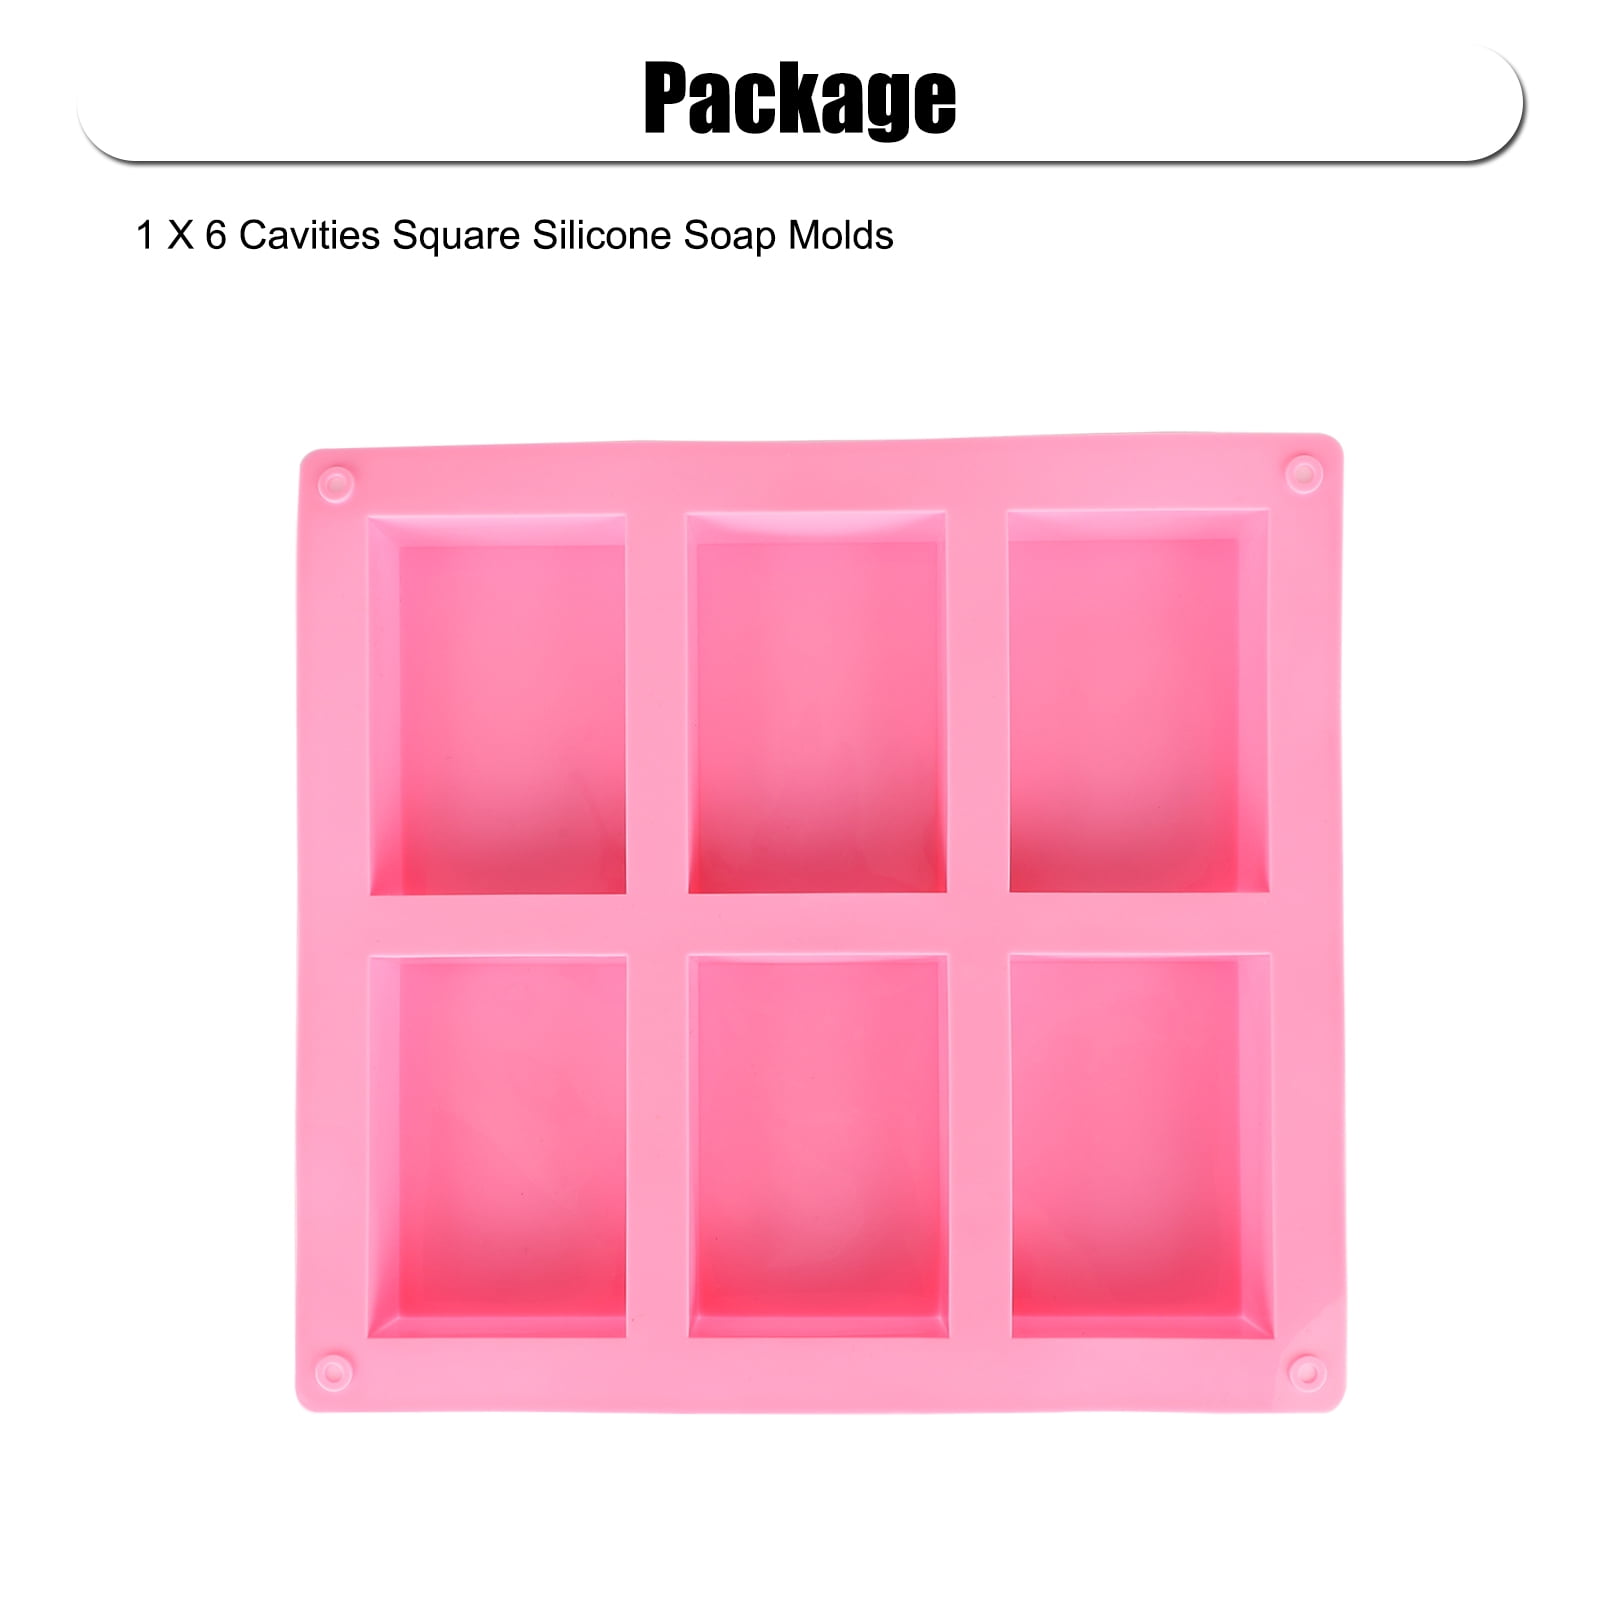  Accfore 9 Pack Soap Making Molds,4-Cavity Ocean Wave Soap  Mold,Cupcake Muffin Soft Baking Pan Mould for DIY Homemade Craft